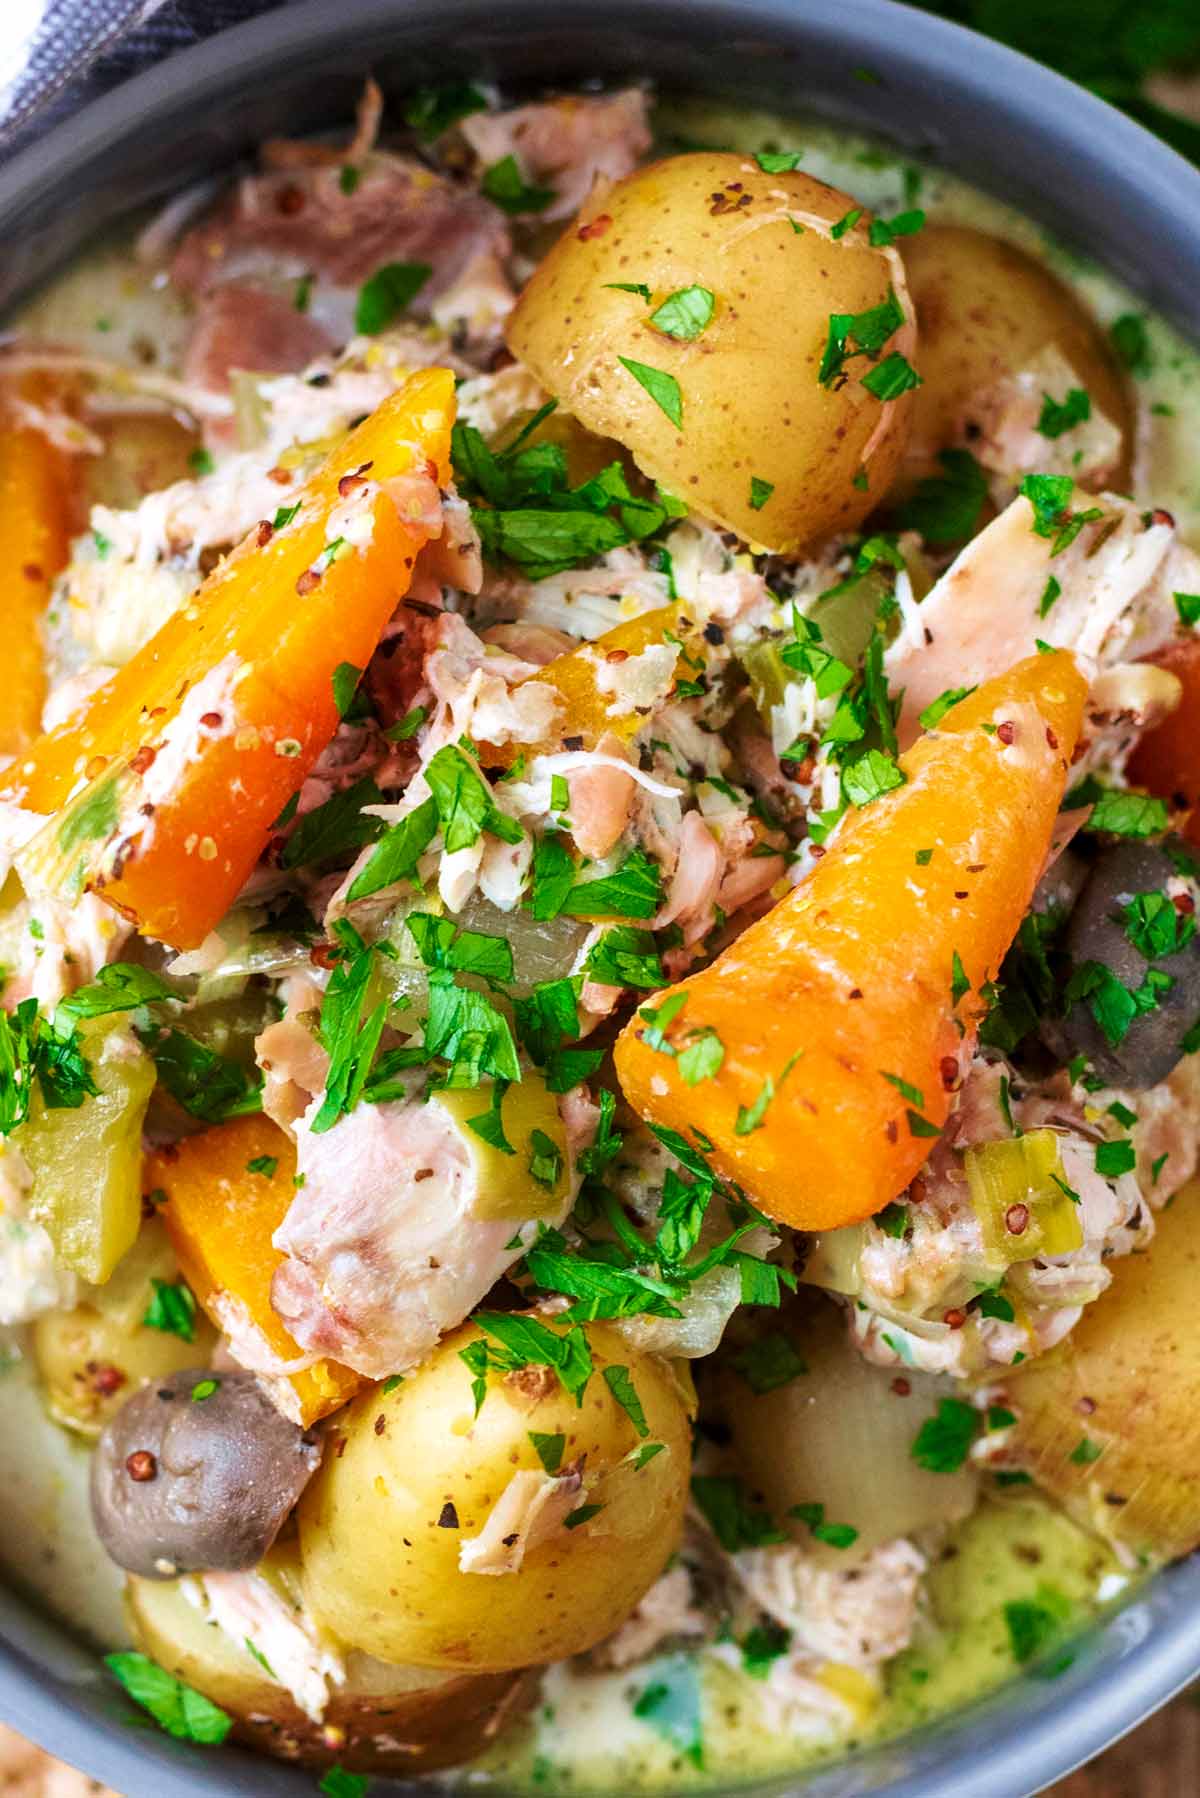 Shredded chicken, carrots, potatoes and herbs in a creamy sauce.